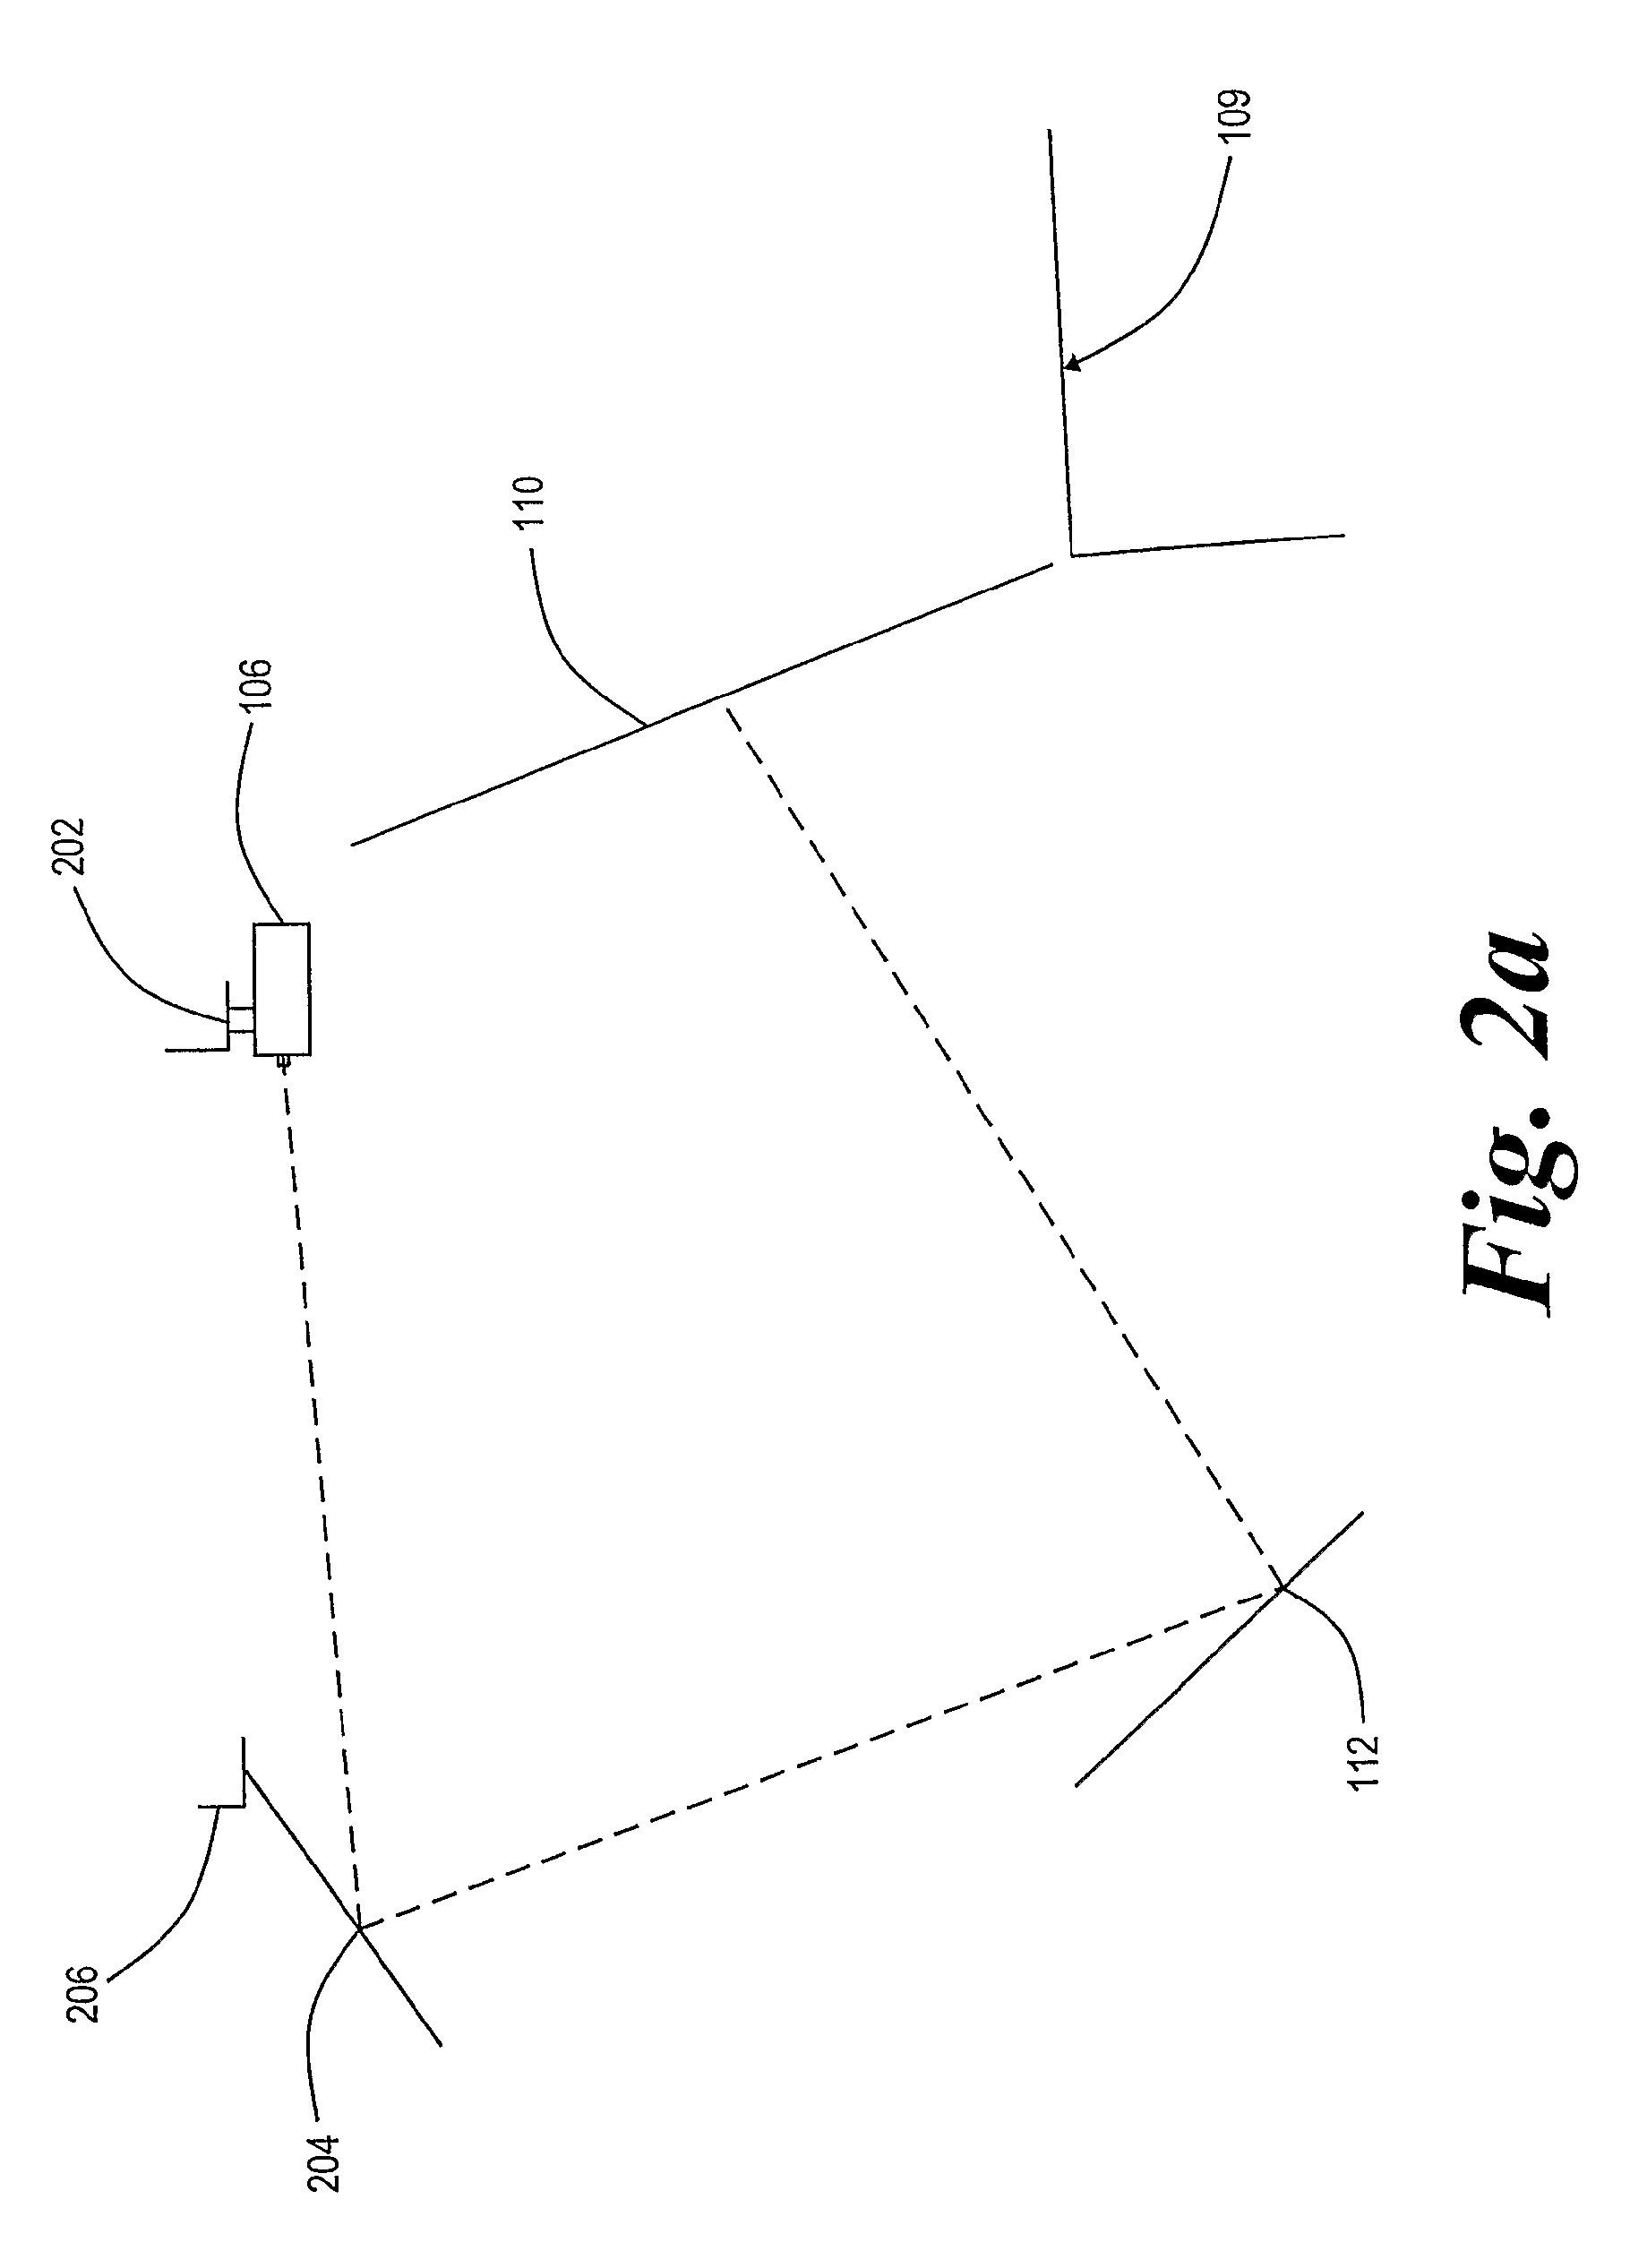 Projection apparatus and method for pepper's ghost illusion